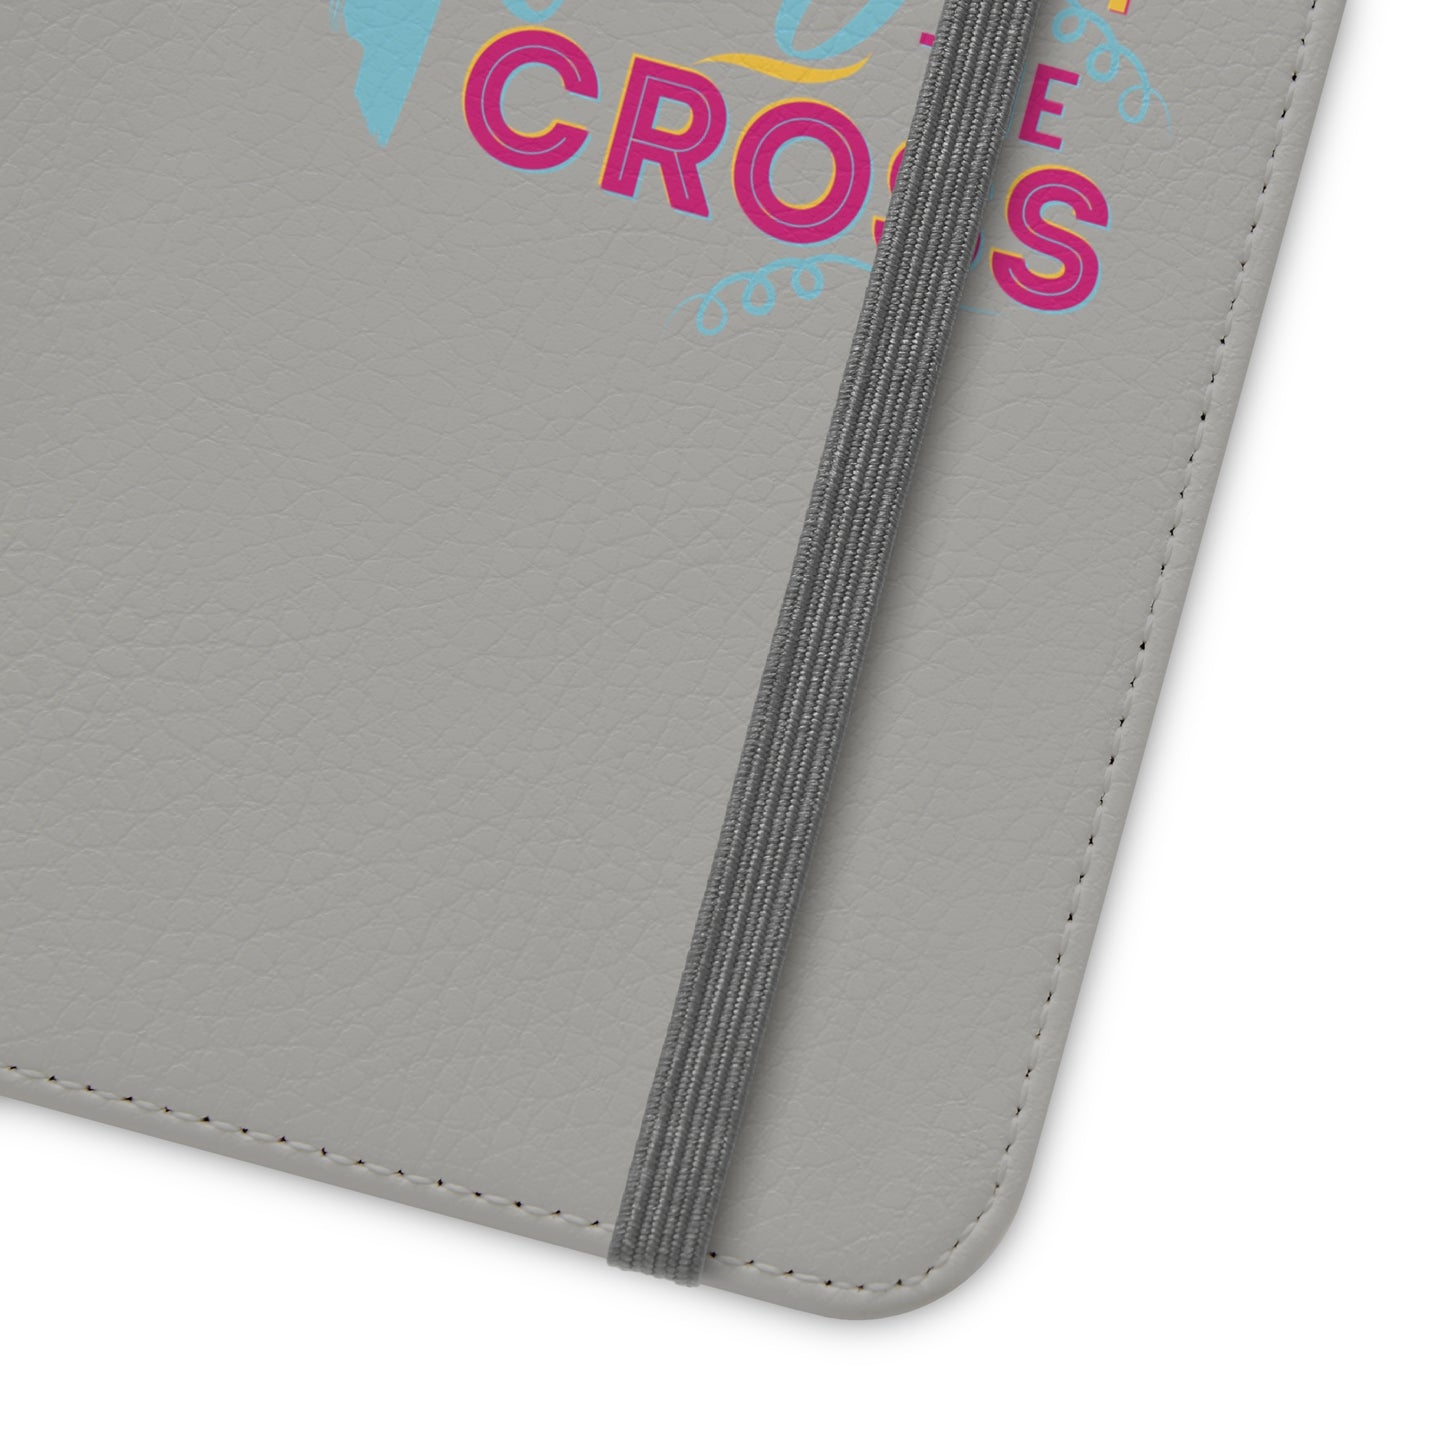 Condemned By Sin Freed By The Cross Phone Flip Cases